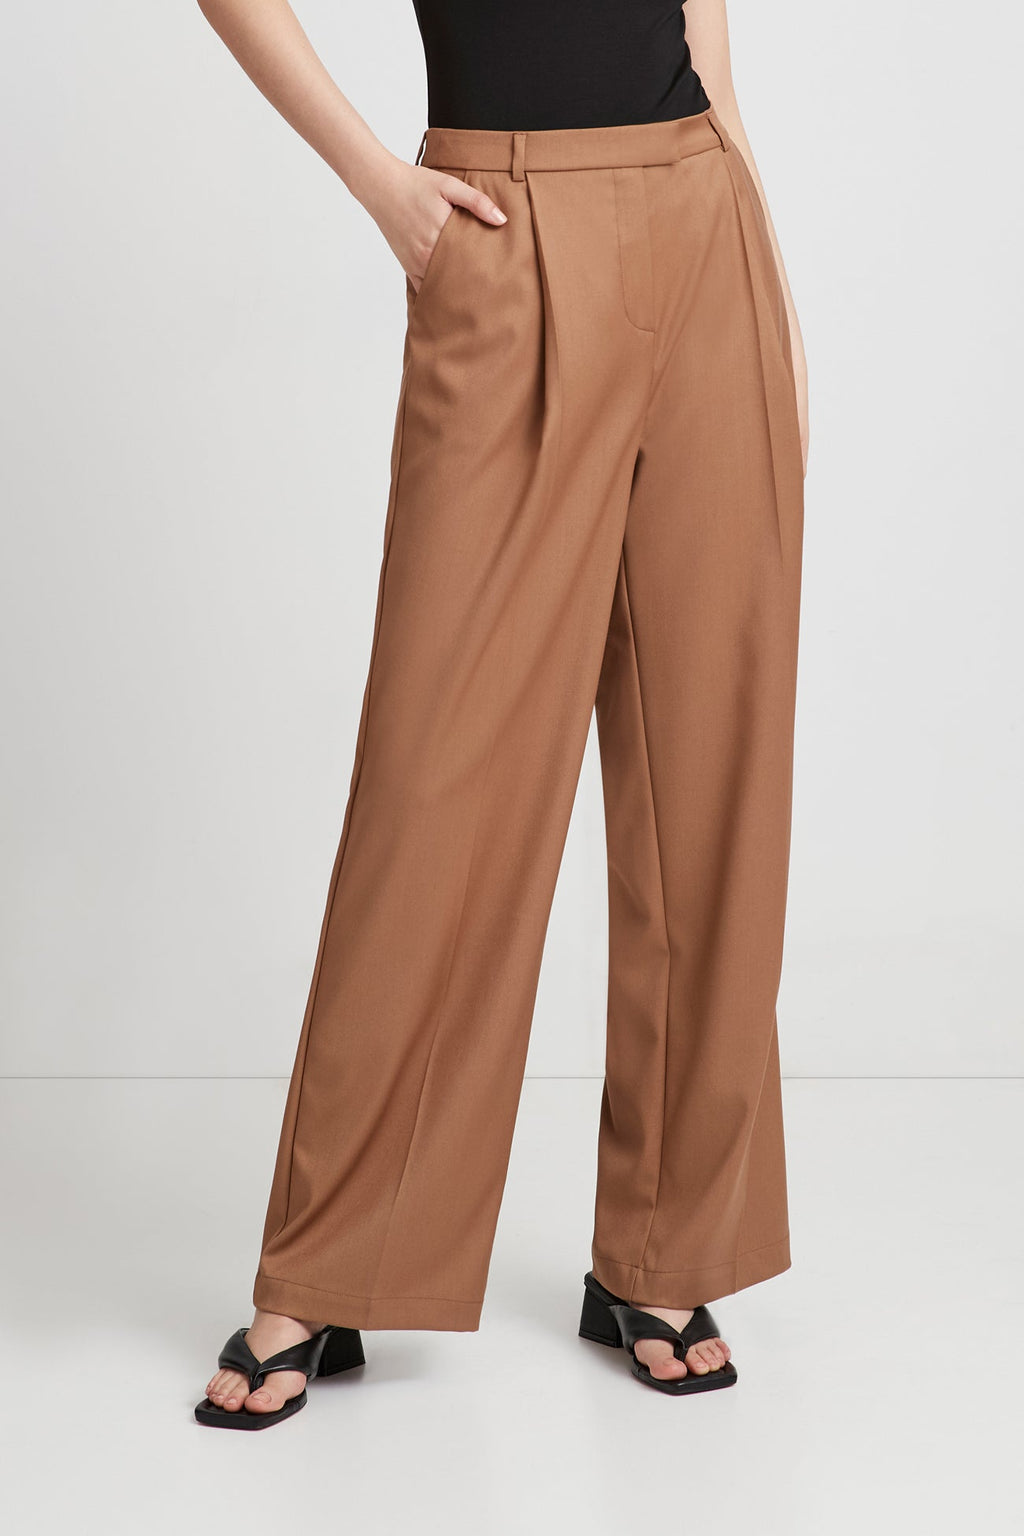 M&S is selling 'the most comfortable trousers' that 'fit like a dream' no  matter your size - and they come in 8 colours